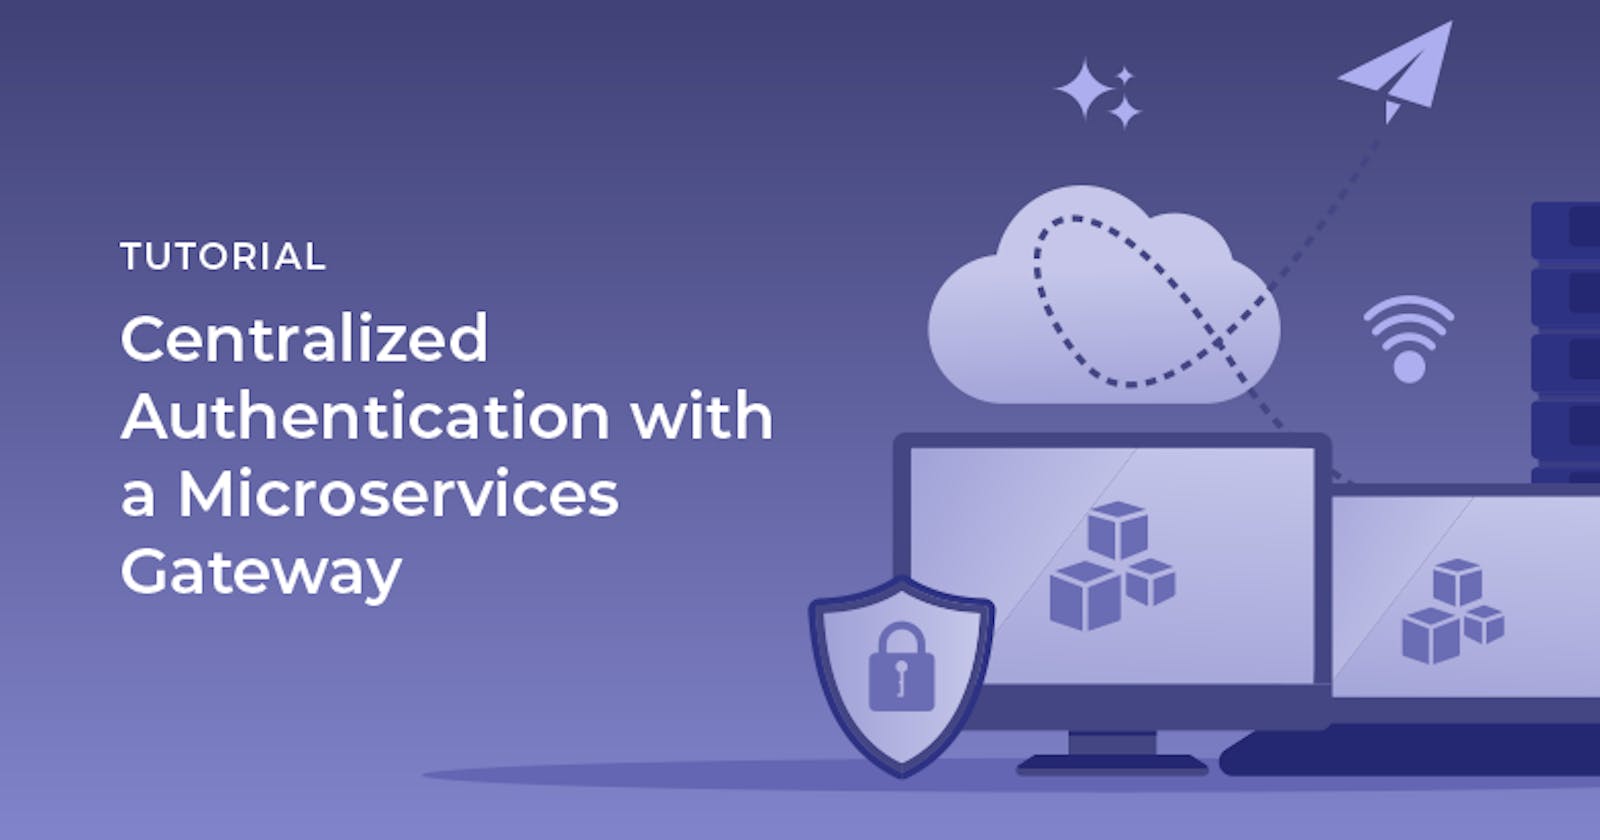 Centralized authentication with a microservices gateway